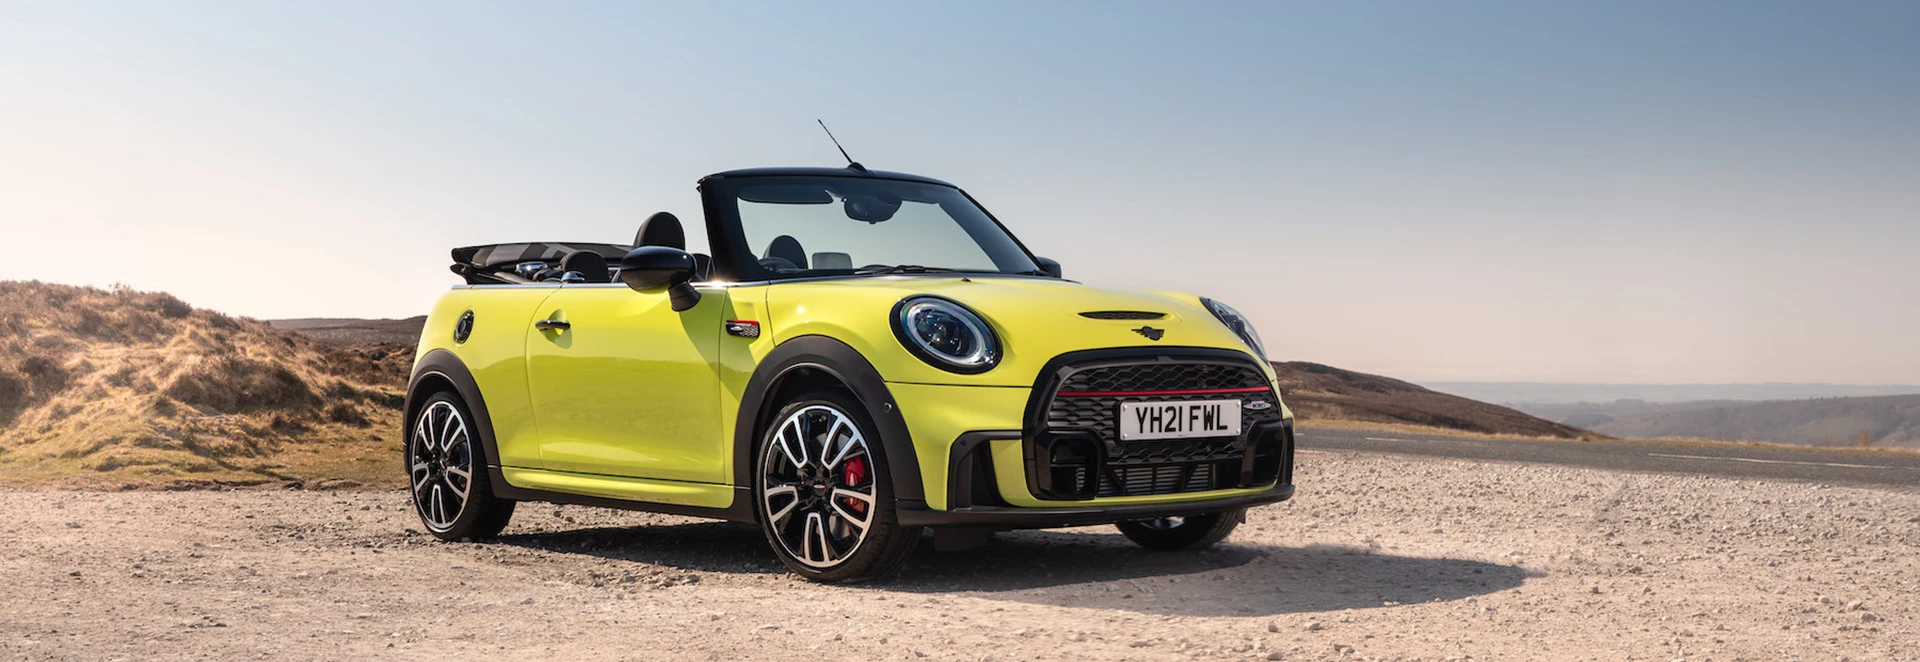 10 most affordable convertibles 2021 